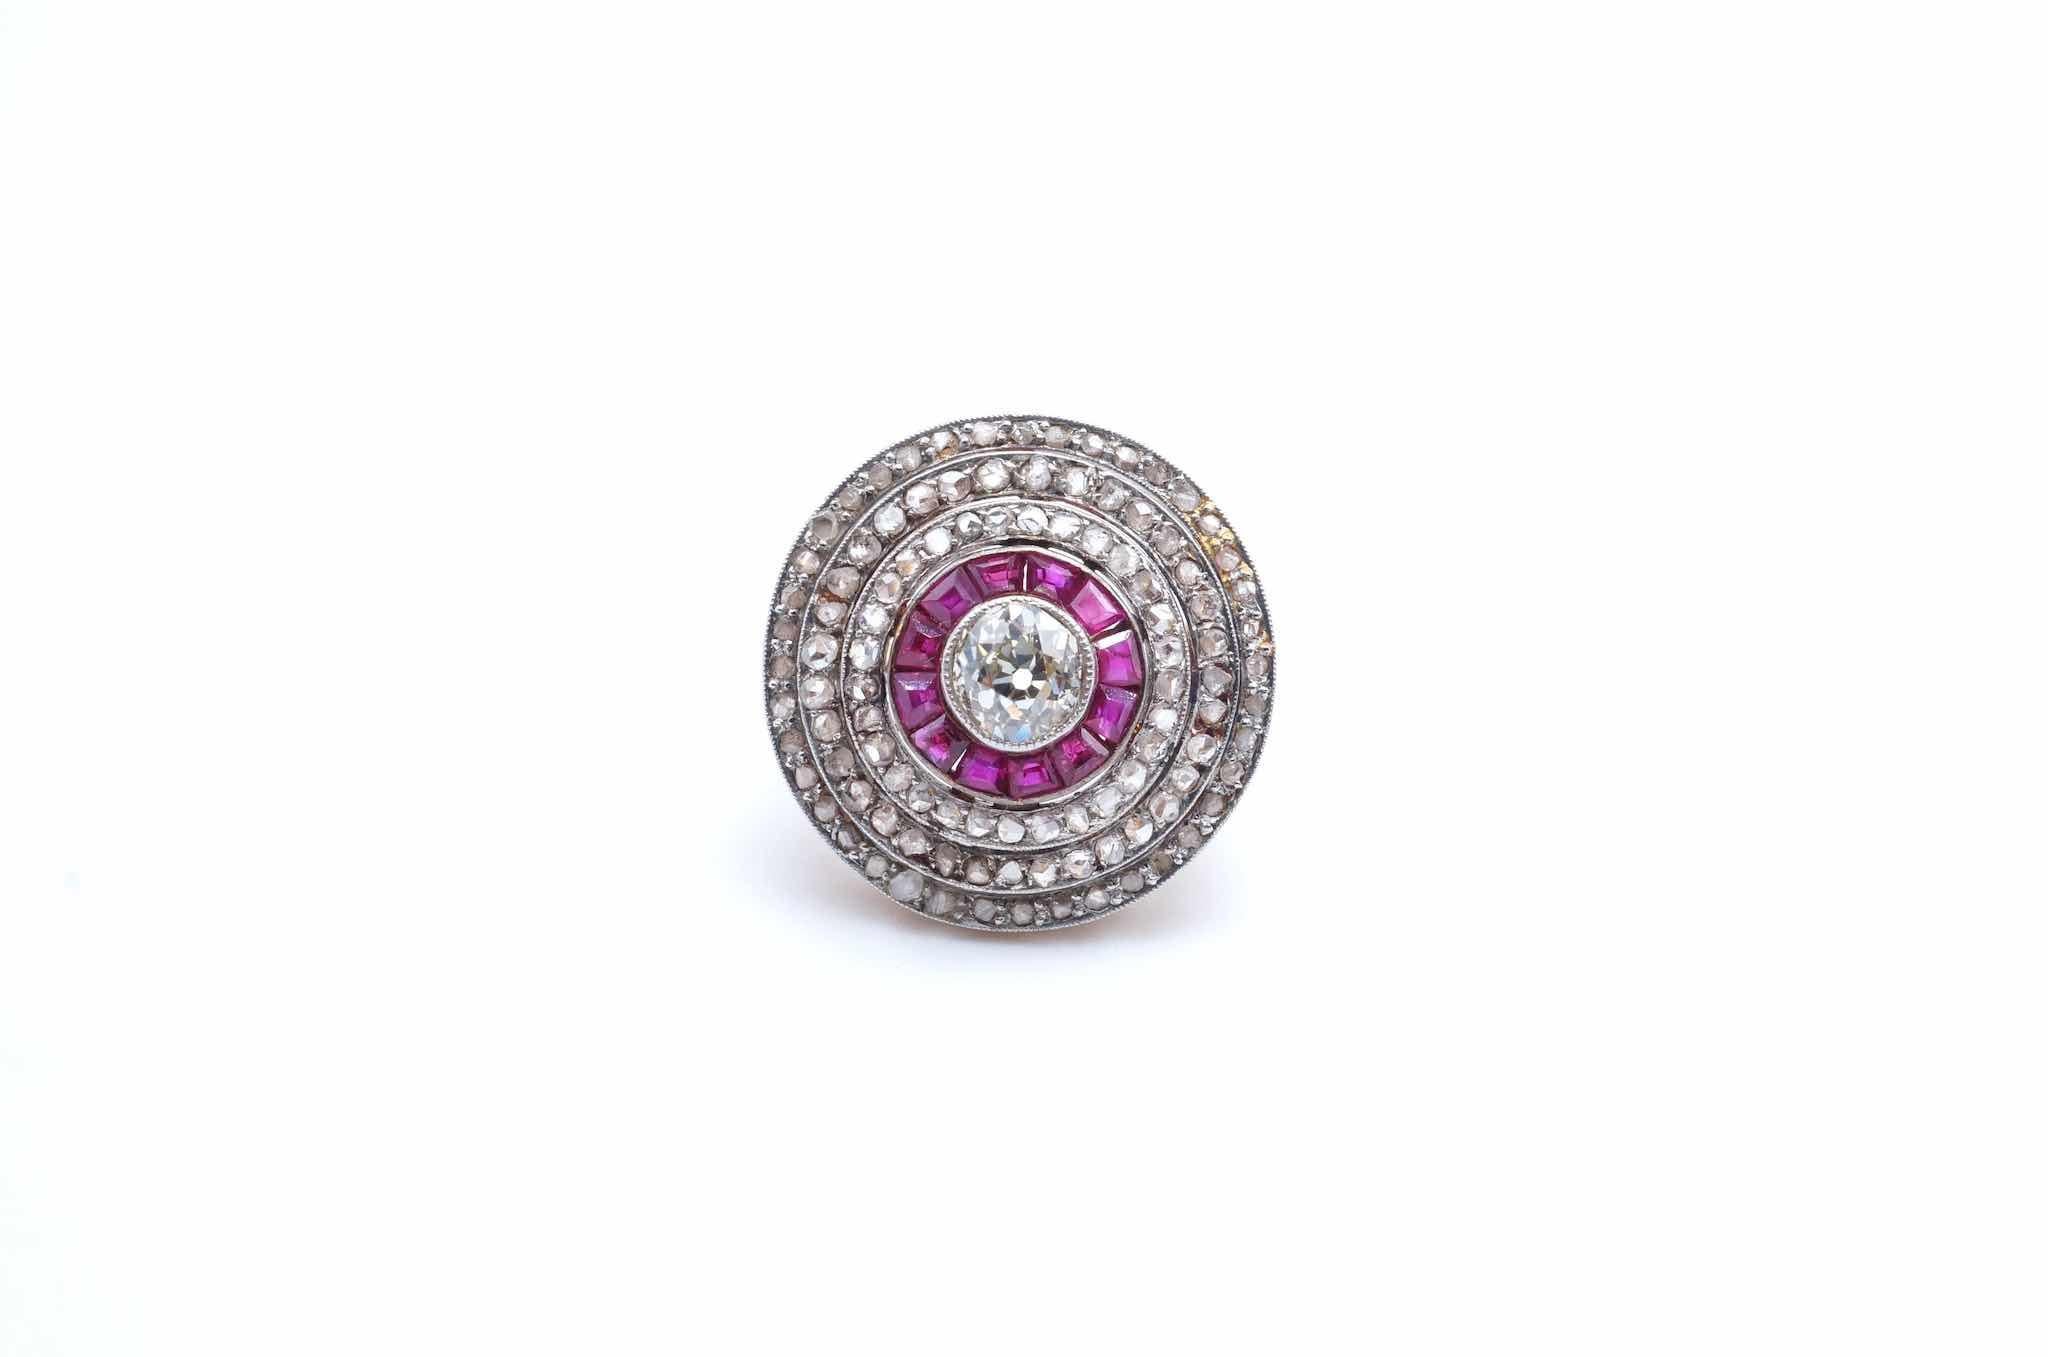 Stones: Old cut diamond of 1 carat,
diamond roses for a total weight of 0.40 carat and calibrated rubies.
Material: 18k yellow gold and platinum
Dimensions: 2.2 cm in diameter
Period: 1920
Weight: 6.5g
Size: 50 (free sizing)
Certificate
Ref. :